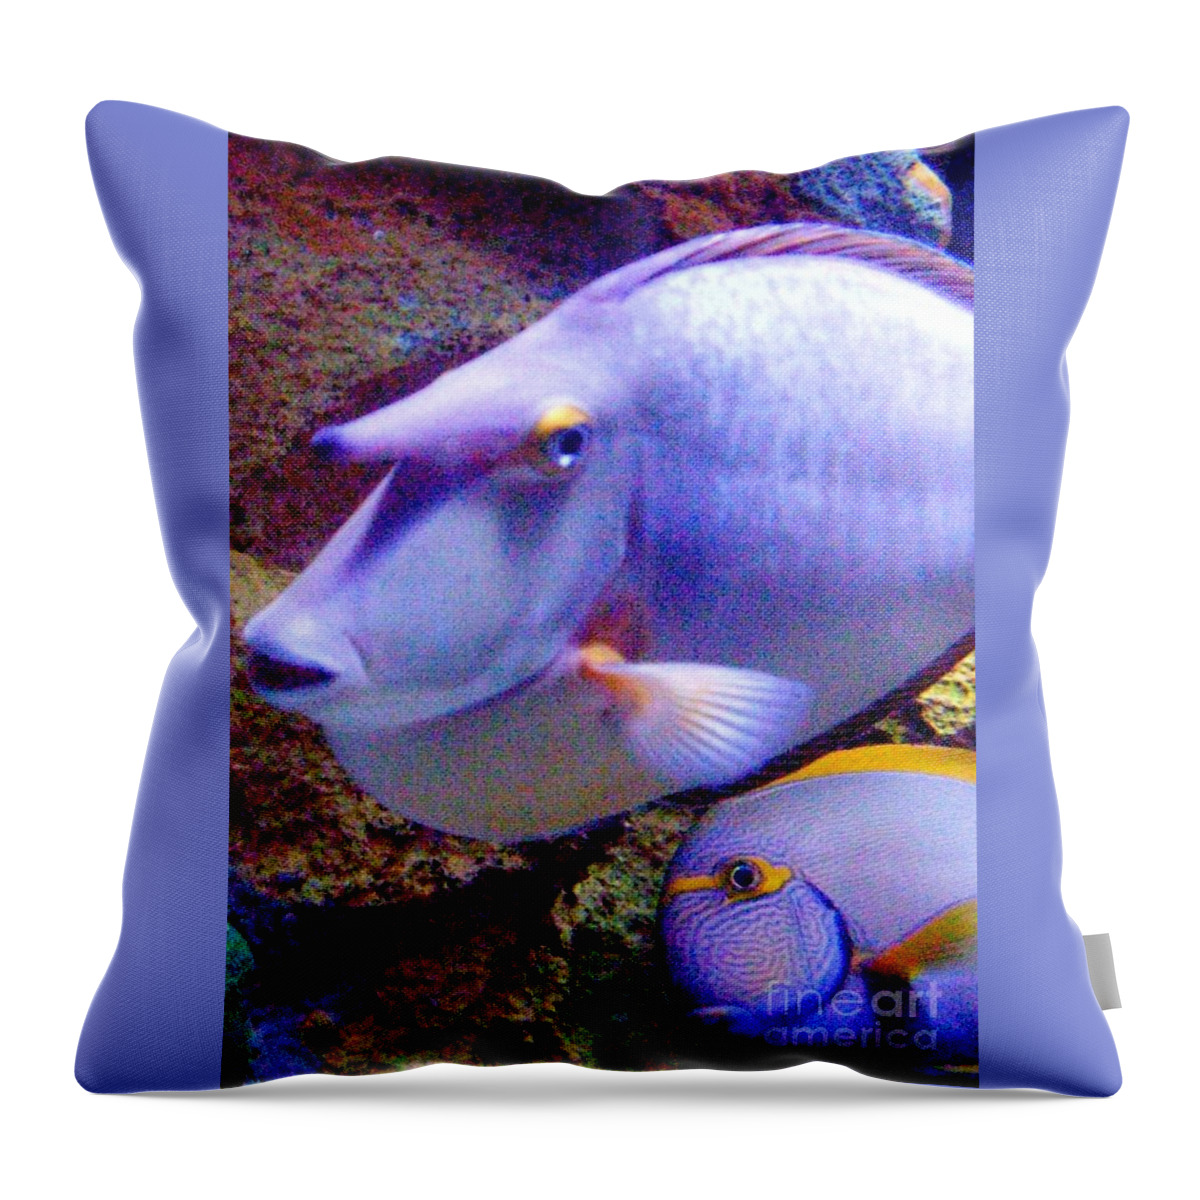 Fish Throw Pillow featuring the photograph The Odd Couple of the Aquarium by Barbie Corbett-Newmin